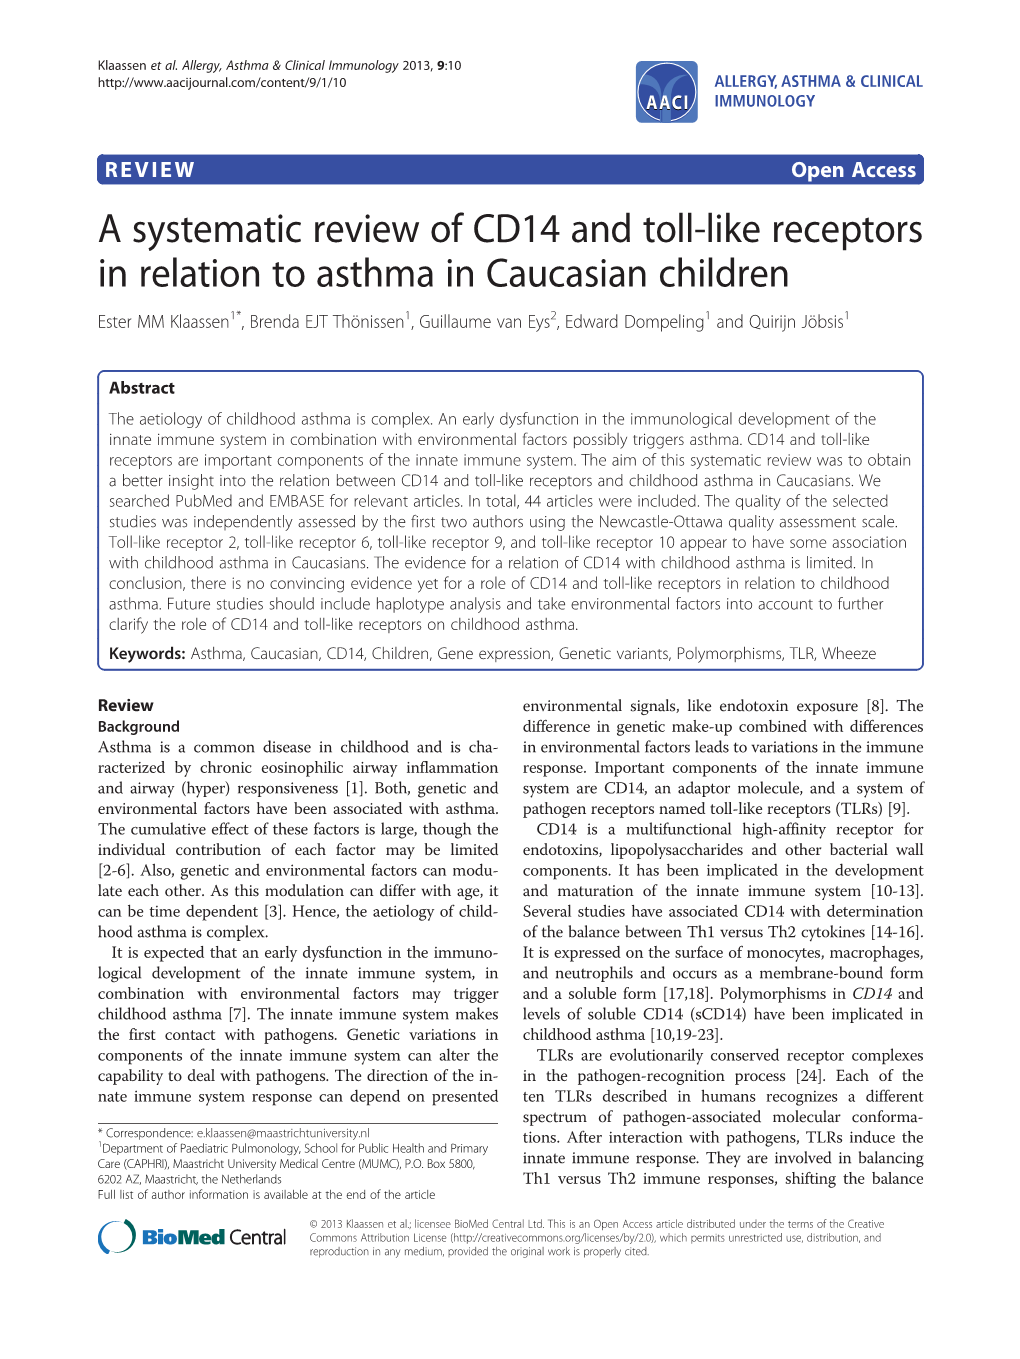 A Systematic Review of CD14 and Toll-Like Receptors in Relation To